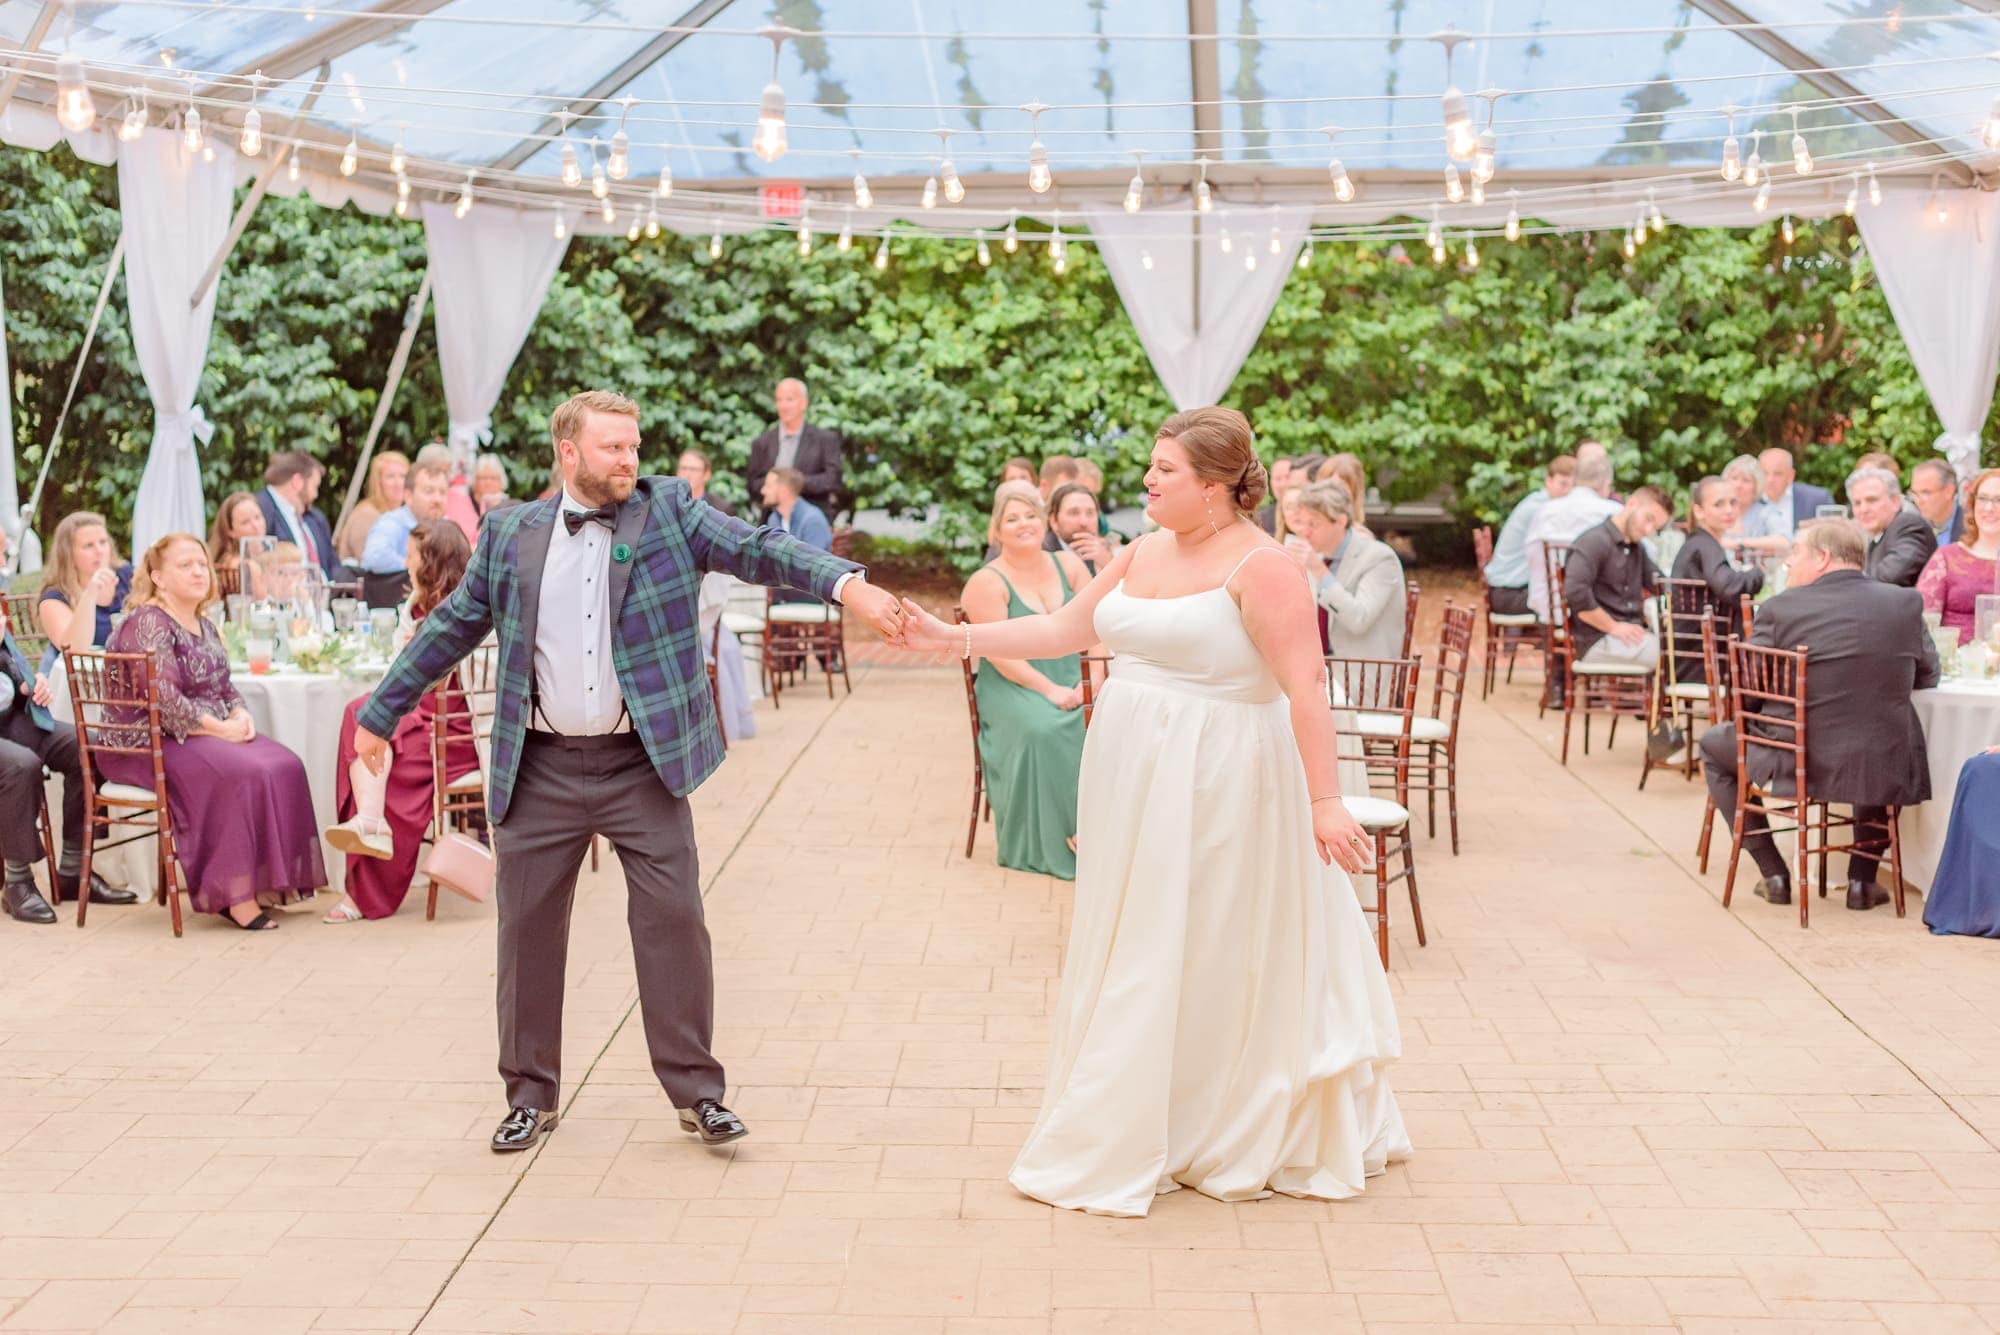 String lights hang from the outdoor tent at Whitehead Manor as the bride and groom share an energetic dance together.